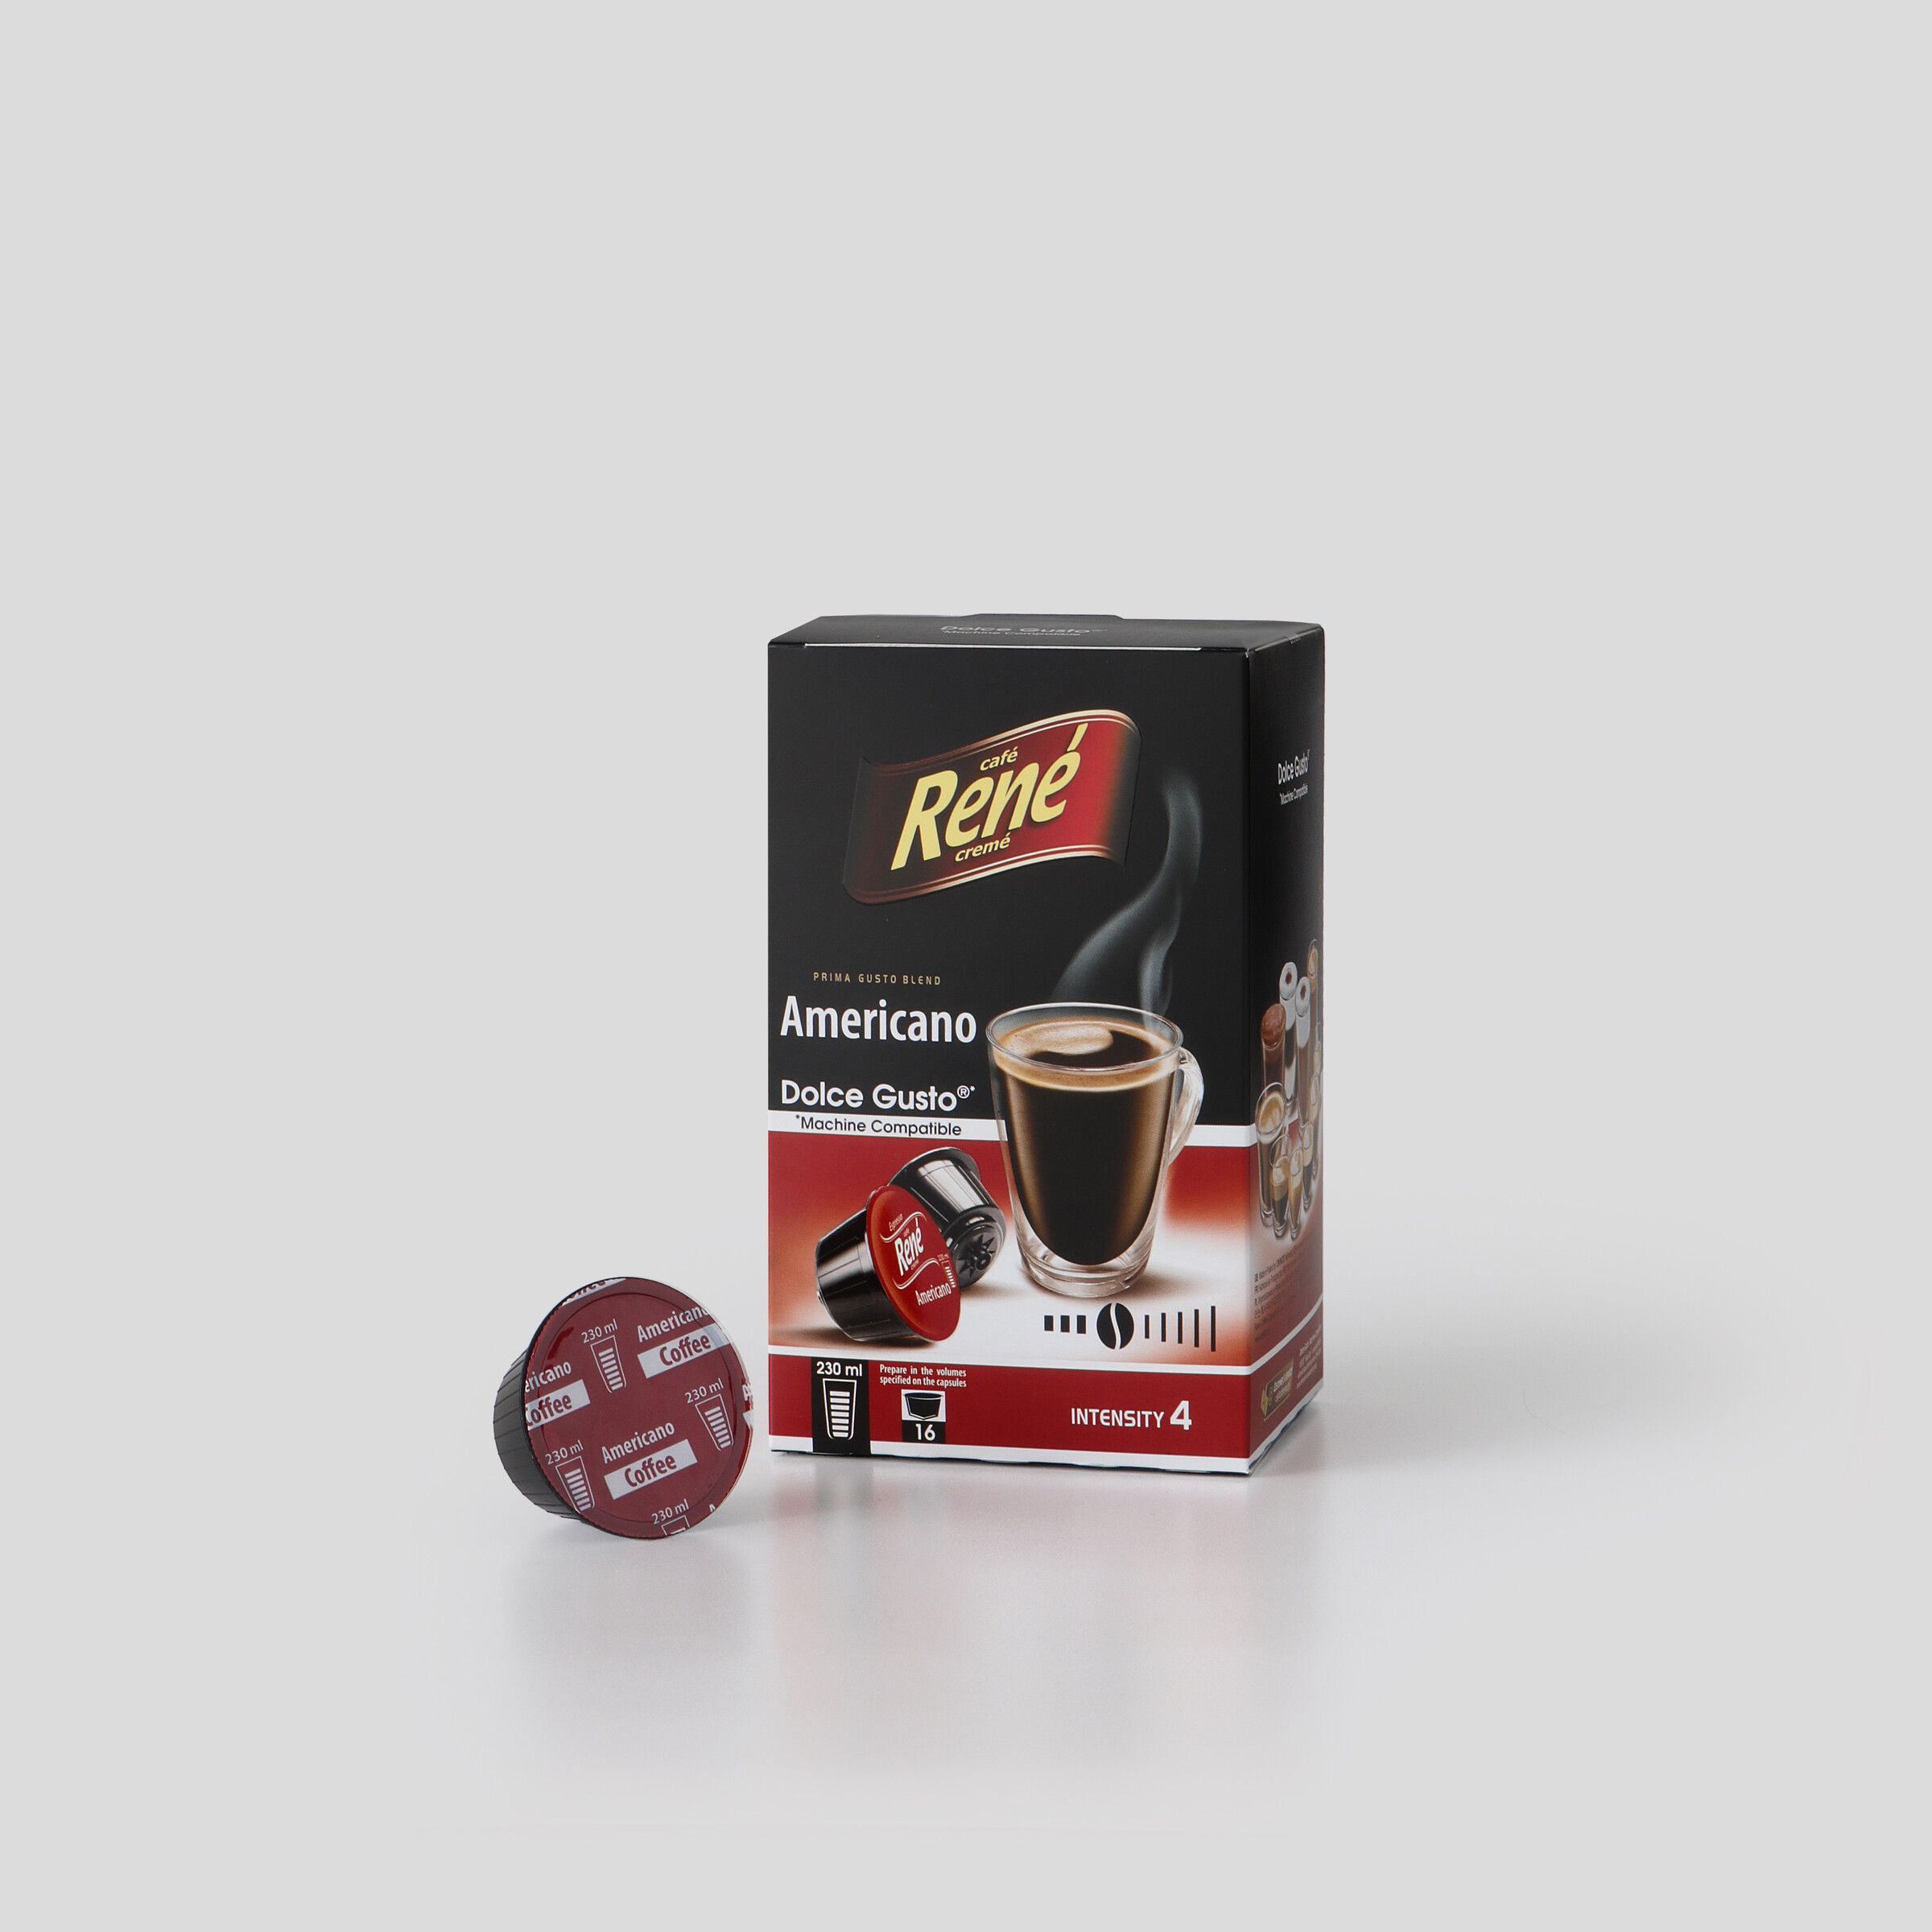 Syd St loop My Coffee Capsules | Rene - Americano x 16 Pods, Dolce Gusto